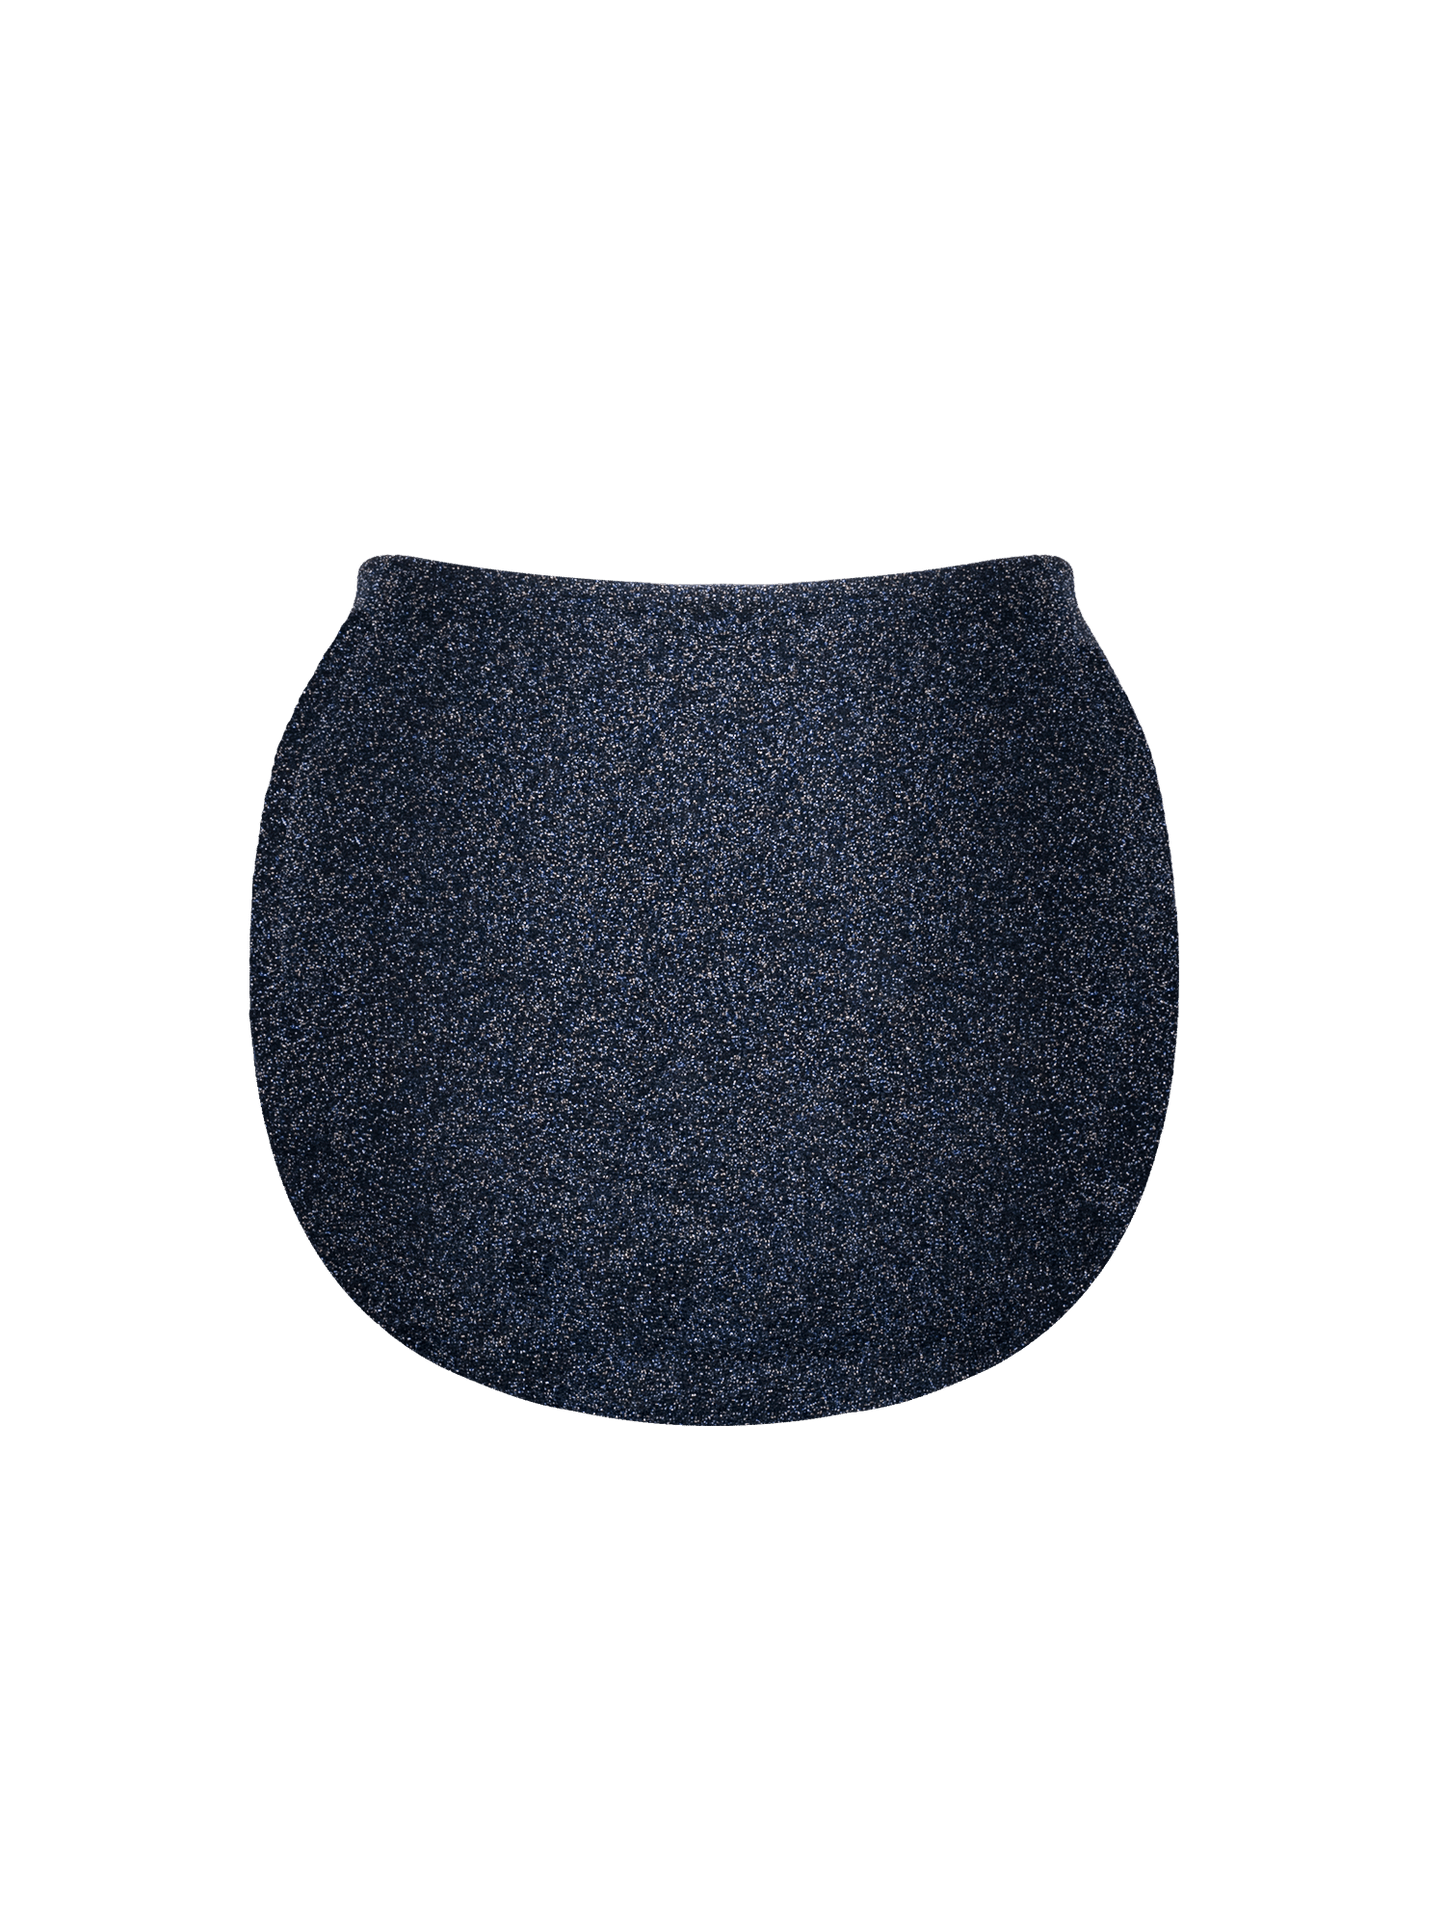 Stardust ~ Classic High Waisted Pantie - Navy